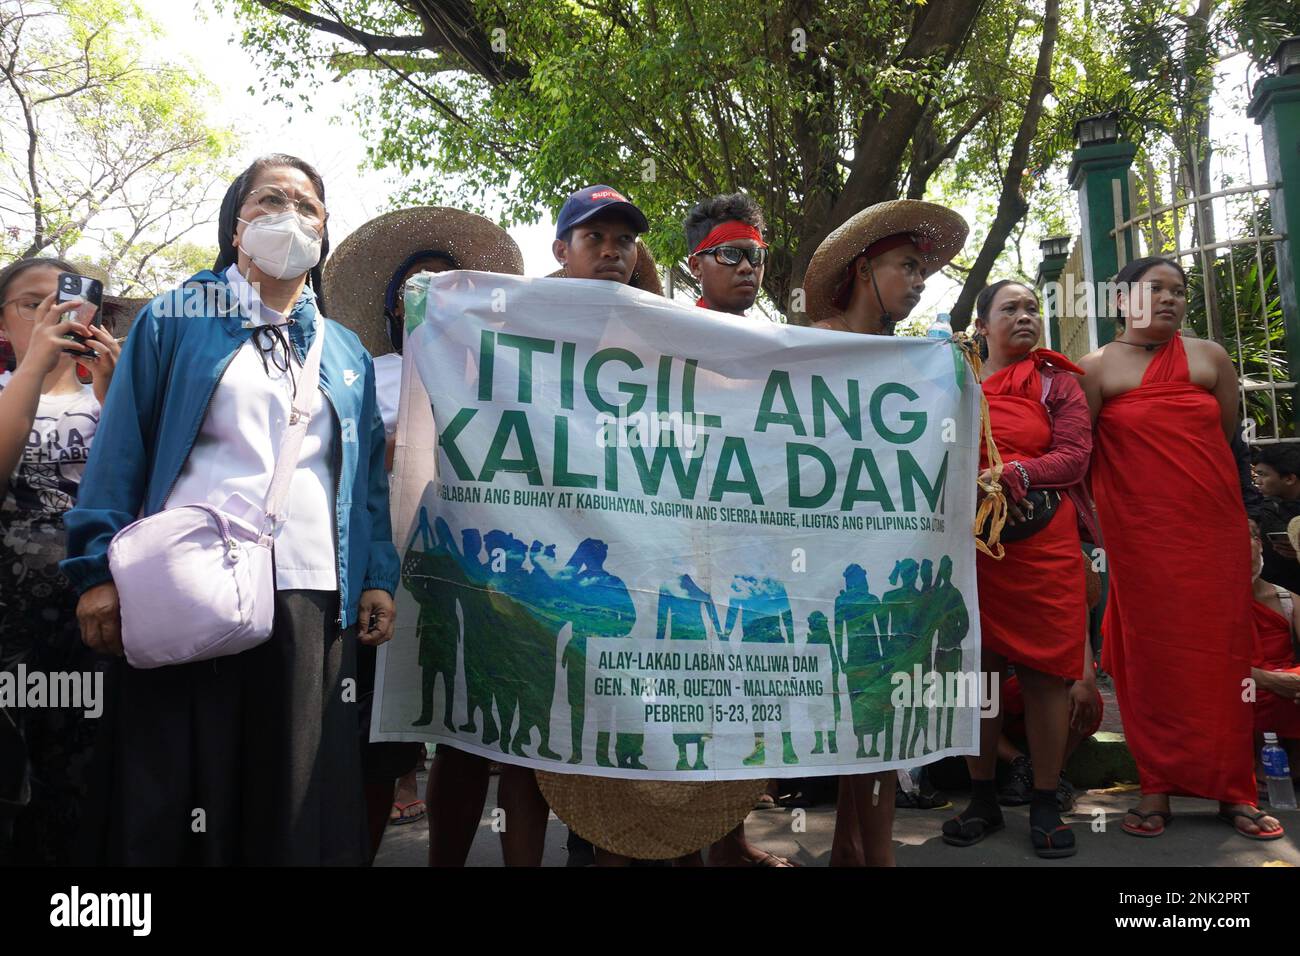 Quezon City, Philippines. 23rh February, 2023. Around 300 indigenous people (IP) belonging to Dumagat-Remontado tribe, together with environmental groups and advocates culminates their 150 kilometers “Alay Lakad Laban sa Kaliwa Dam” (Sacrifice Walk Against the Construction of Kaliwa Dam) going to Malacanang Palace on February 23, 2023. The nine-day sacrificial walk is portraying their opposition on the construction of the New Centennial Water Source–Kaliwa Dam Project (NWCP-KDP), in the borders of Rizal and Quezon Province. The mega-dam project will be submerging almost hundred hectares of anc Stock Photo